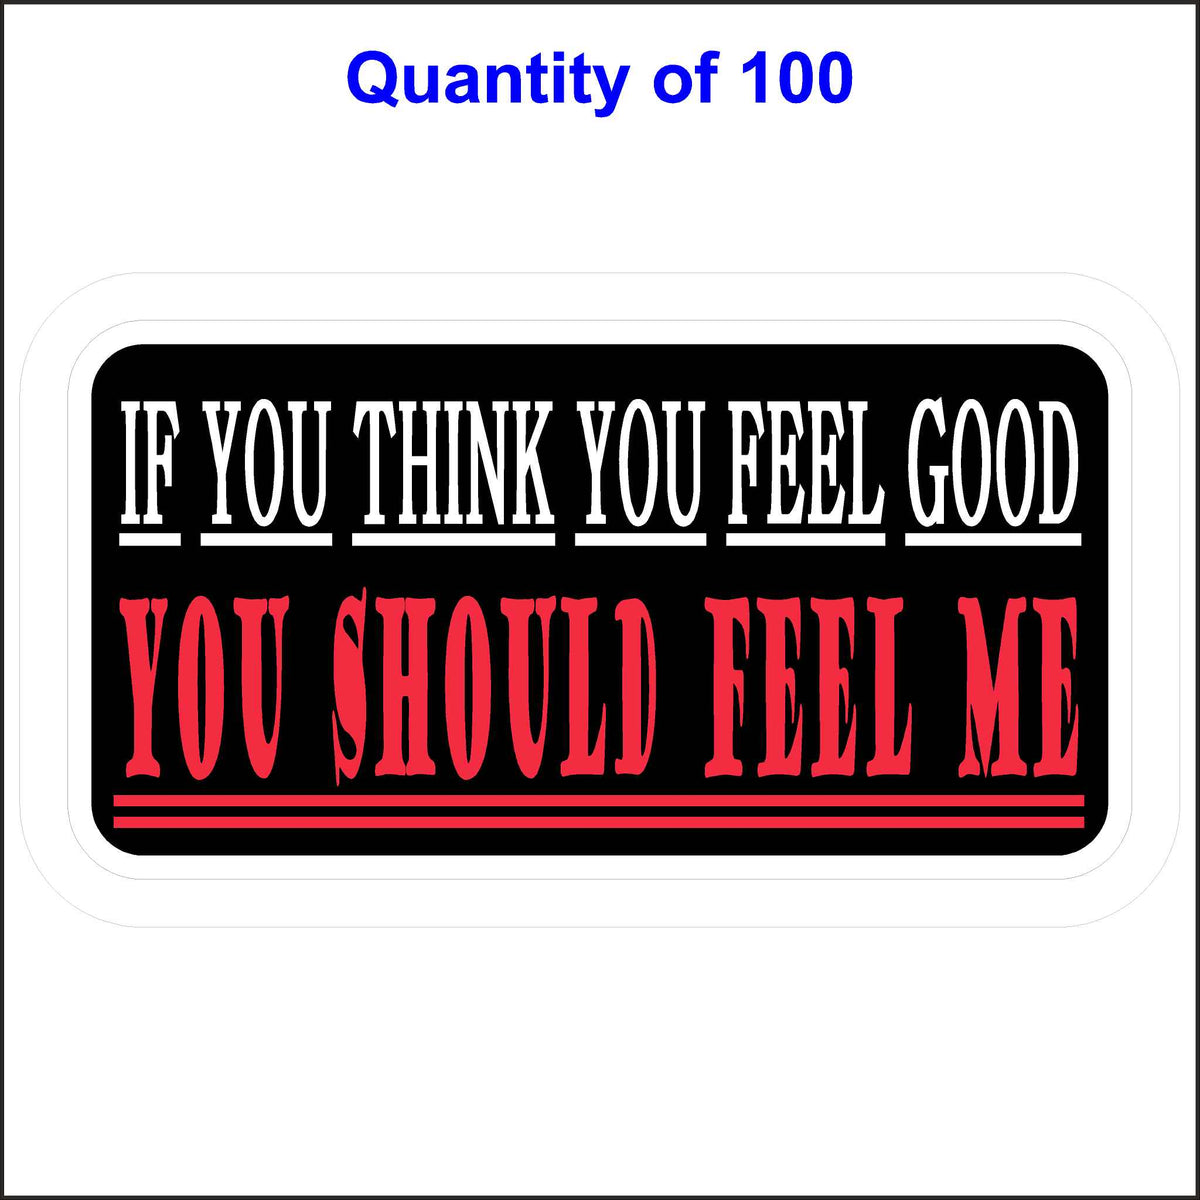 100 Quantity of This If You Think You Feel Good You Should Feel Me Sticker.